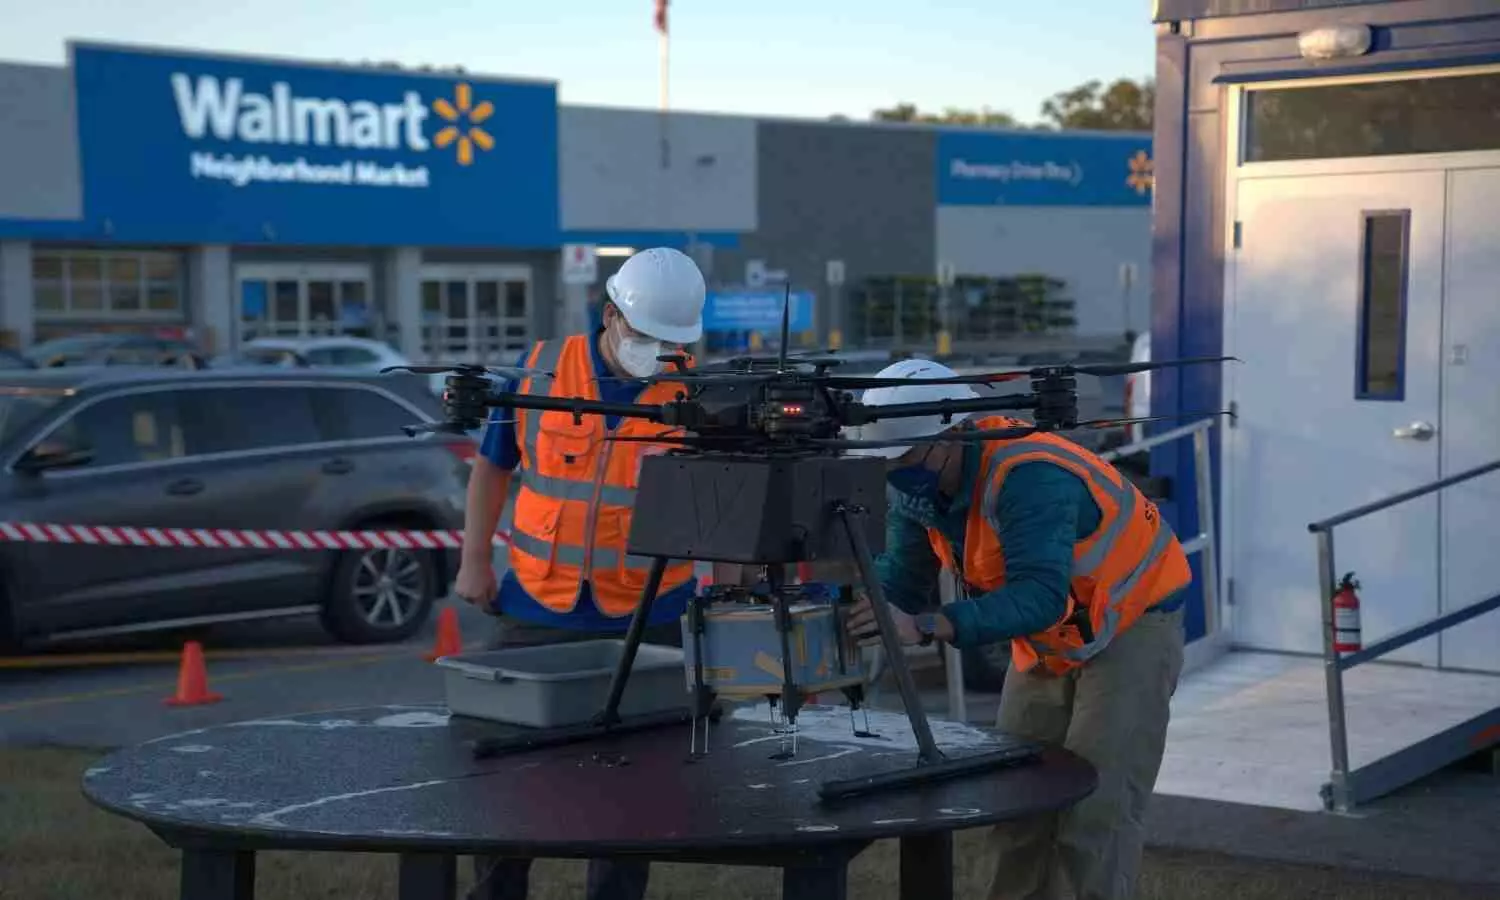 Walmart expands drone delivery operations with DroneUp in six states